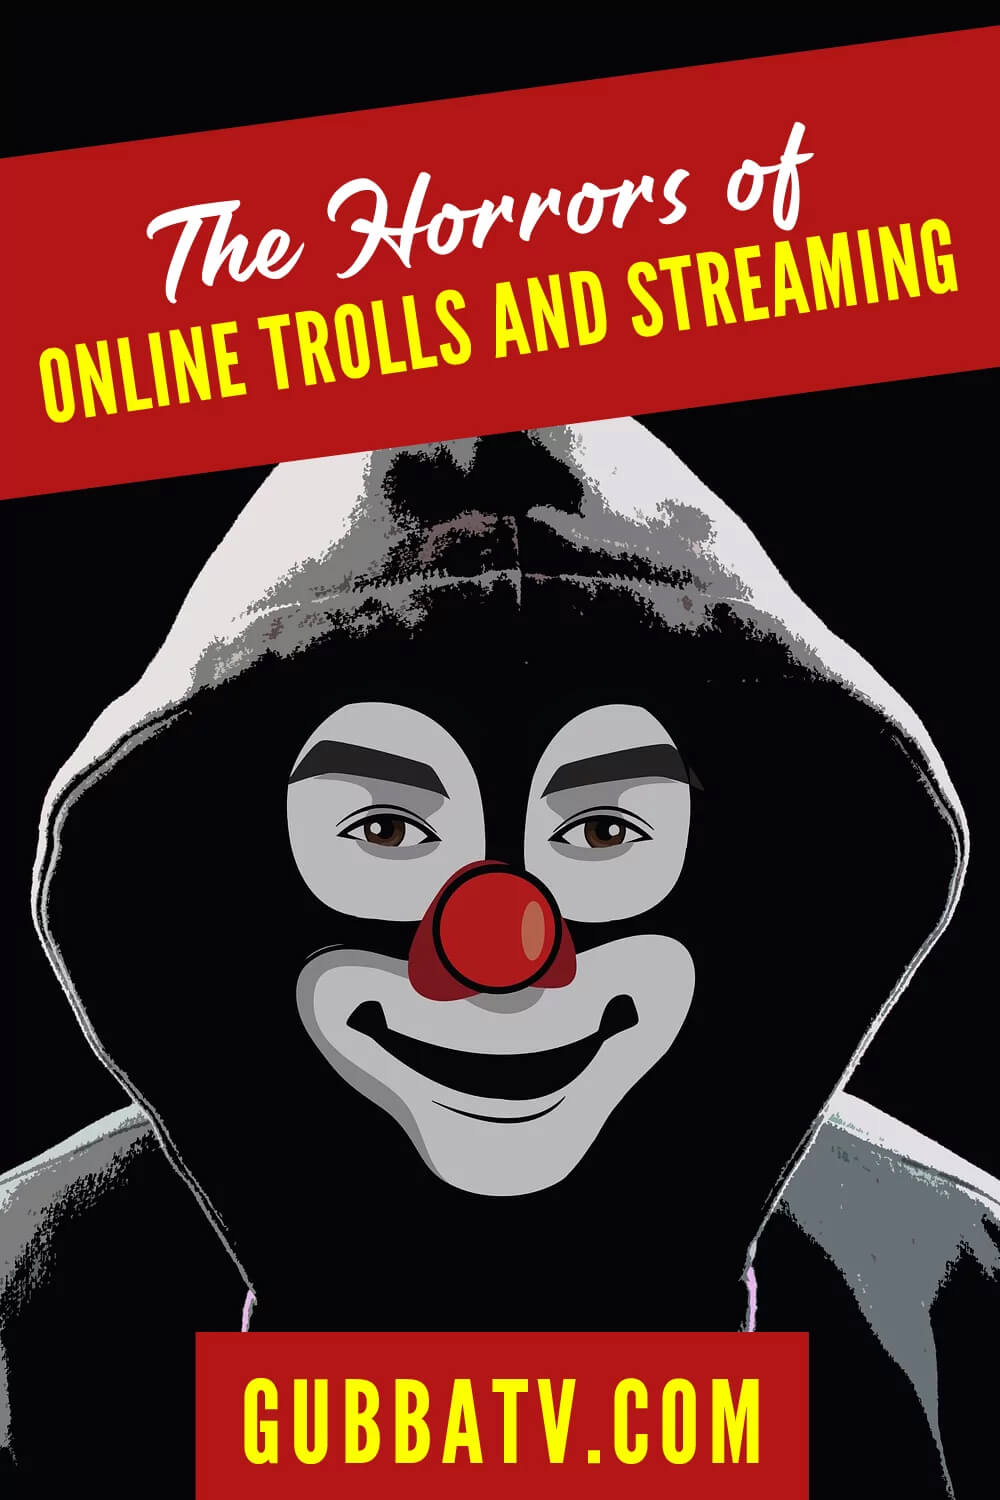 The Horrors of Online Trolls and Streaming